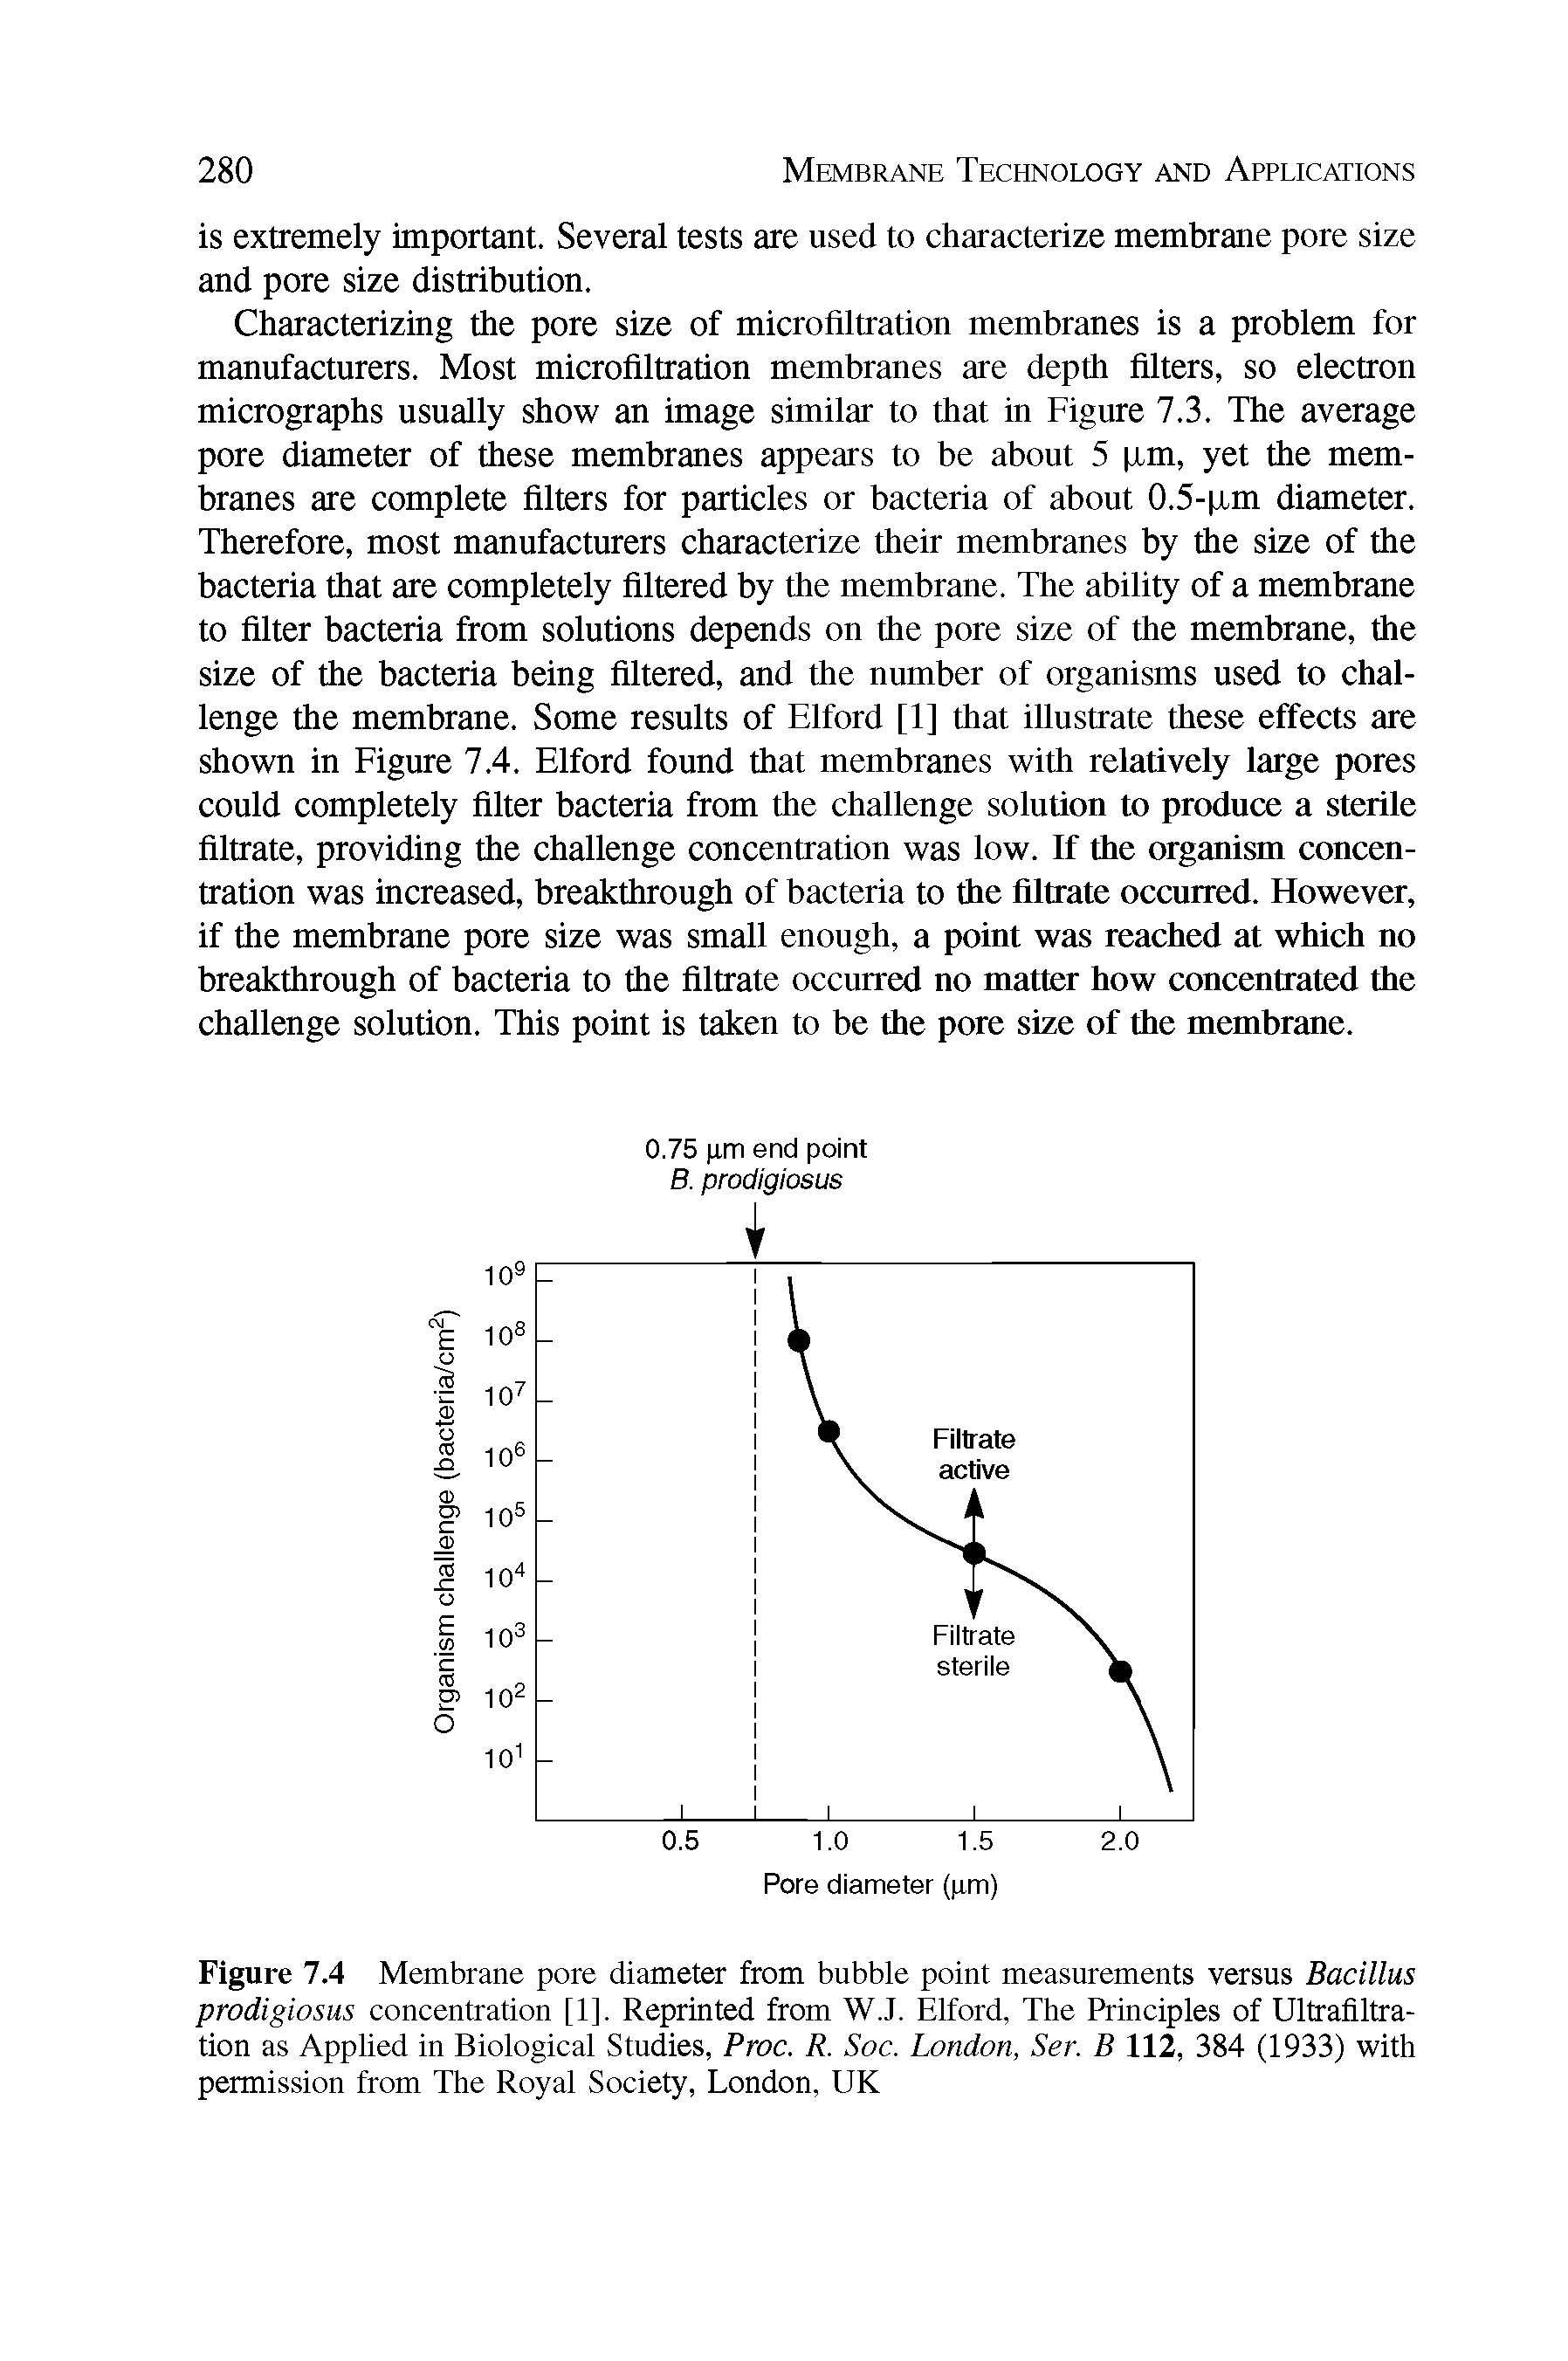 Figure 7.4 Membrane pore diameter from bubble point measurements versus Bacillus prodigiosus concentration [1], Reprinted from W.J. Elford, The Principles of Ultrafiltration as Applied in Biological Studies, Proc. R. Soc. London, Ser. B 112, 384 (1933) with permission from The Royal Society, London, UK...